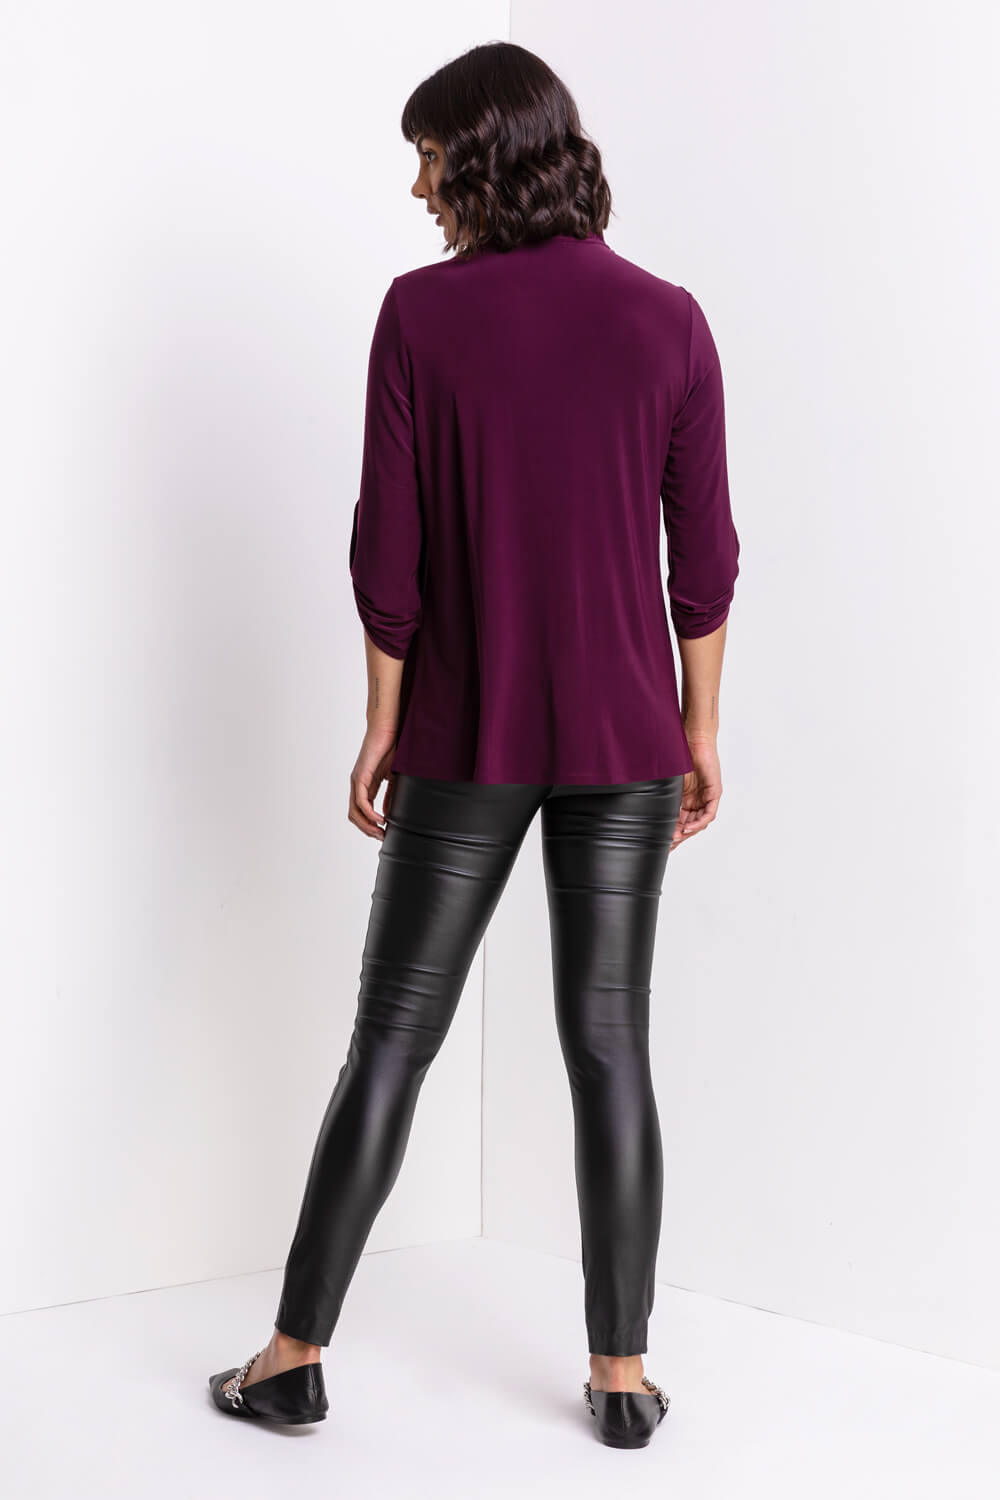 Plum Frill Neck Jersey Blouse, Image 2 of 5